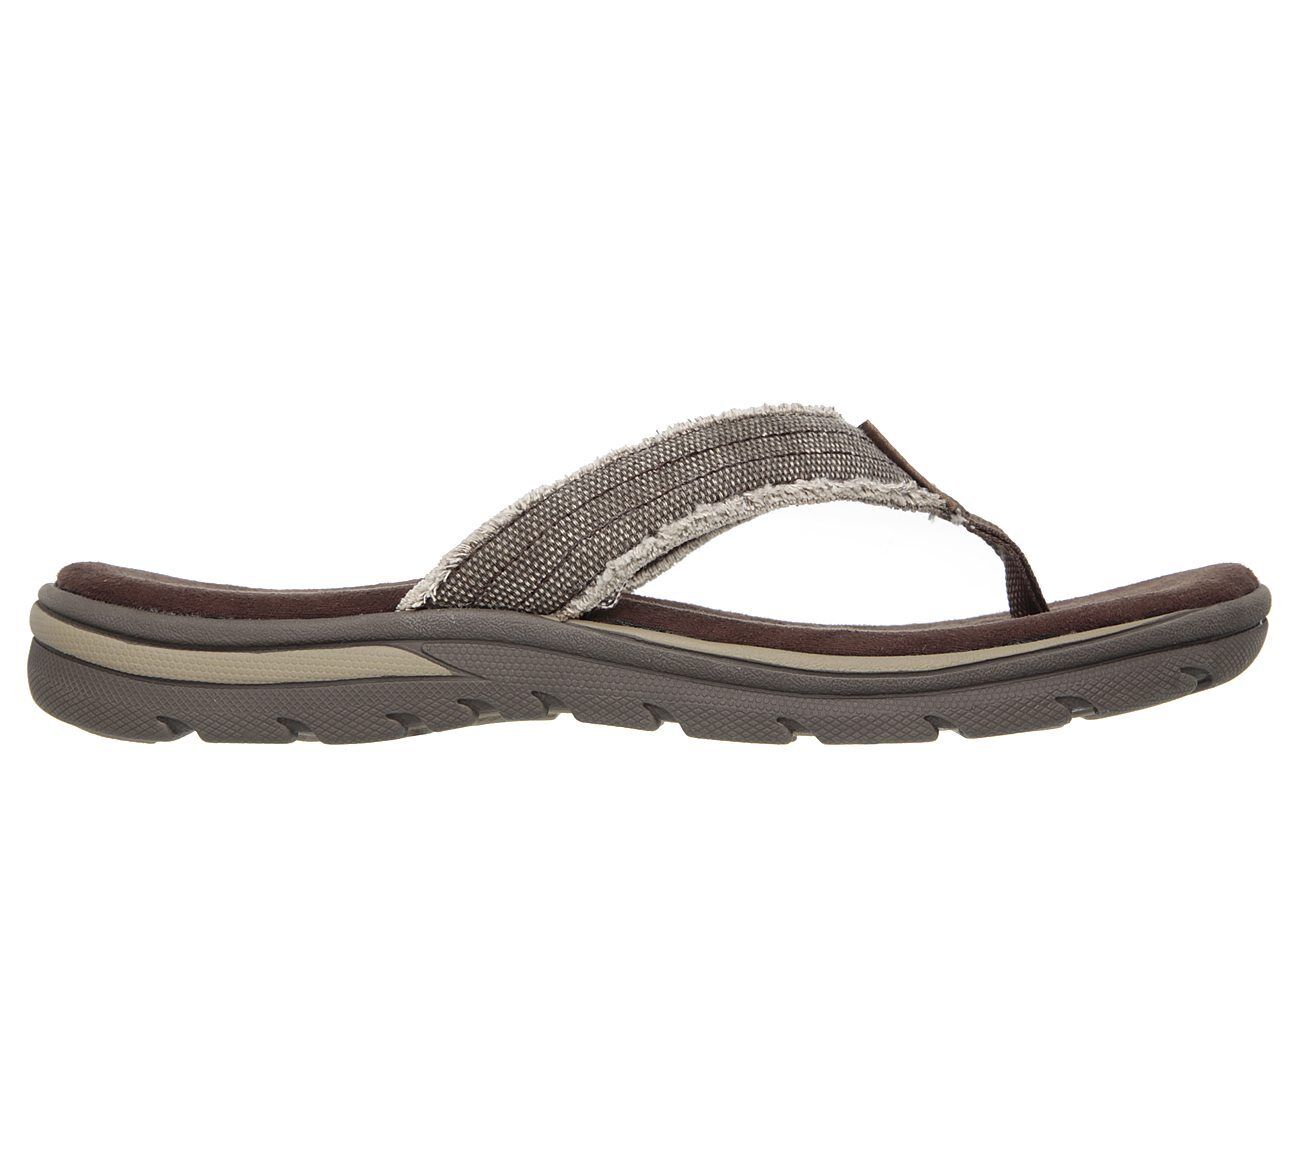 Men's Skechers Relaxed Fit: Supreme - Bosnia Sandals, 64152 /CHOC Multiple Sizes Chocolate